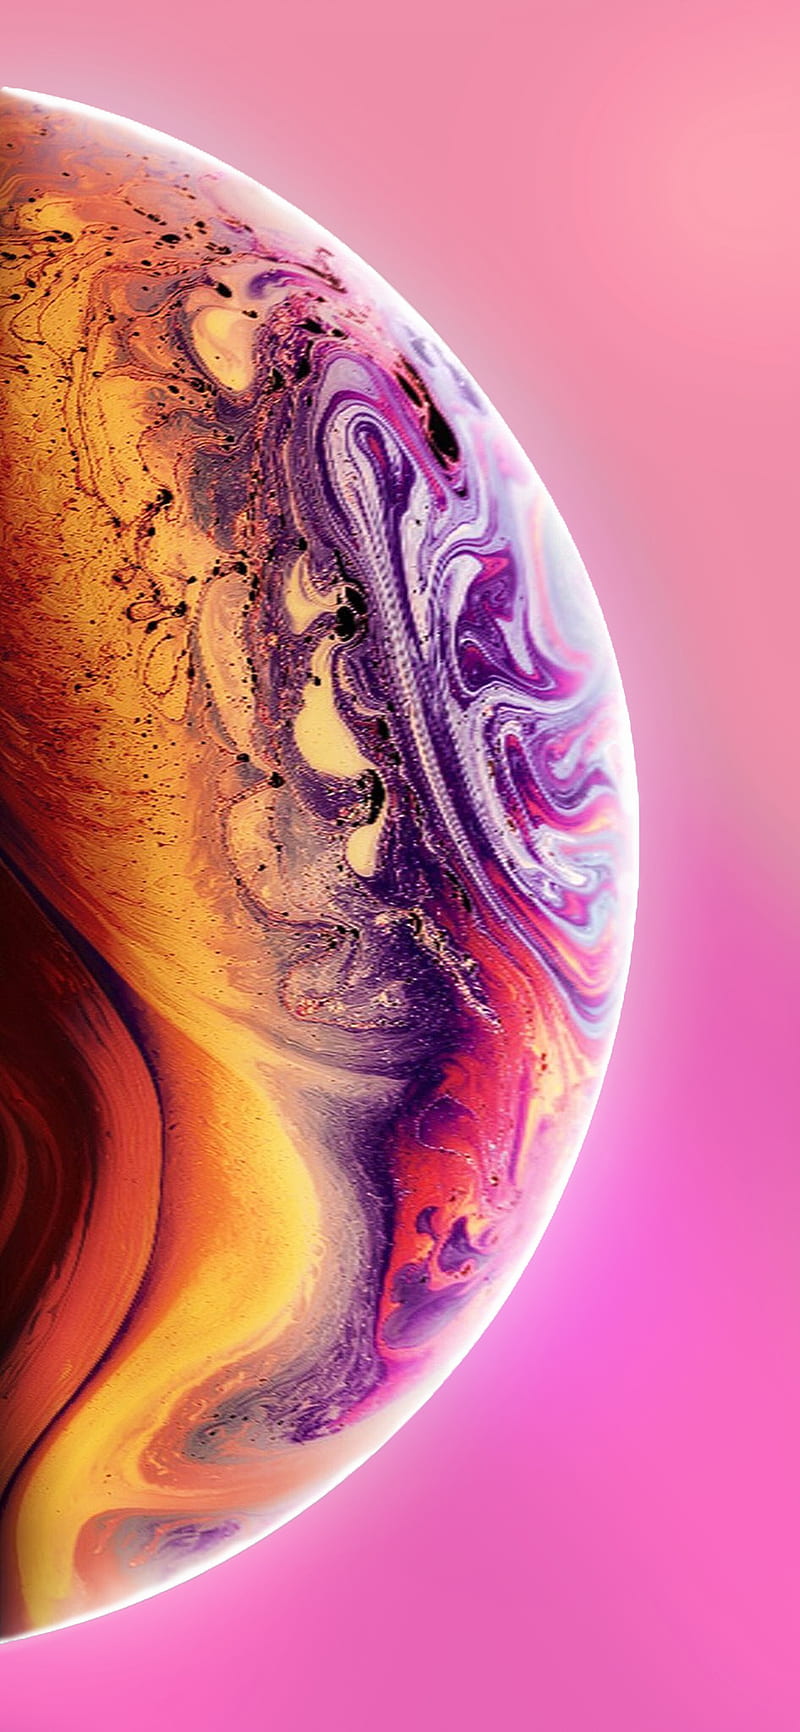 IPhone Xs, cosmos, earth, flash, iphone, iphone x, jamesmarbles, pink,  planet, HD phone wallpaper | Peakpx